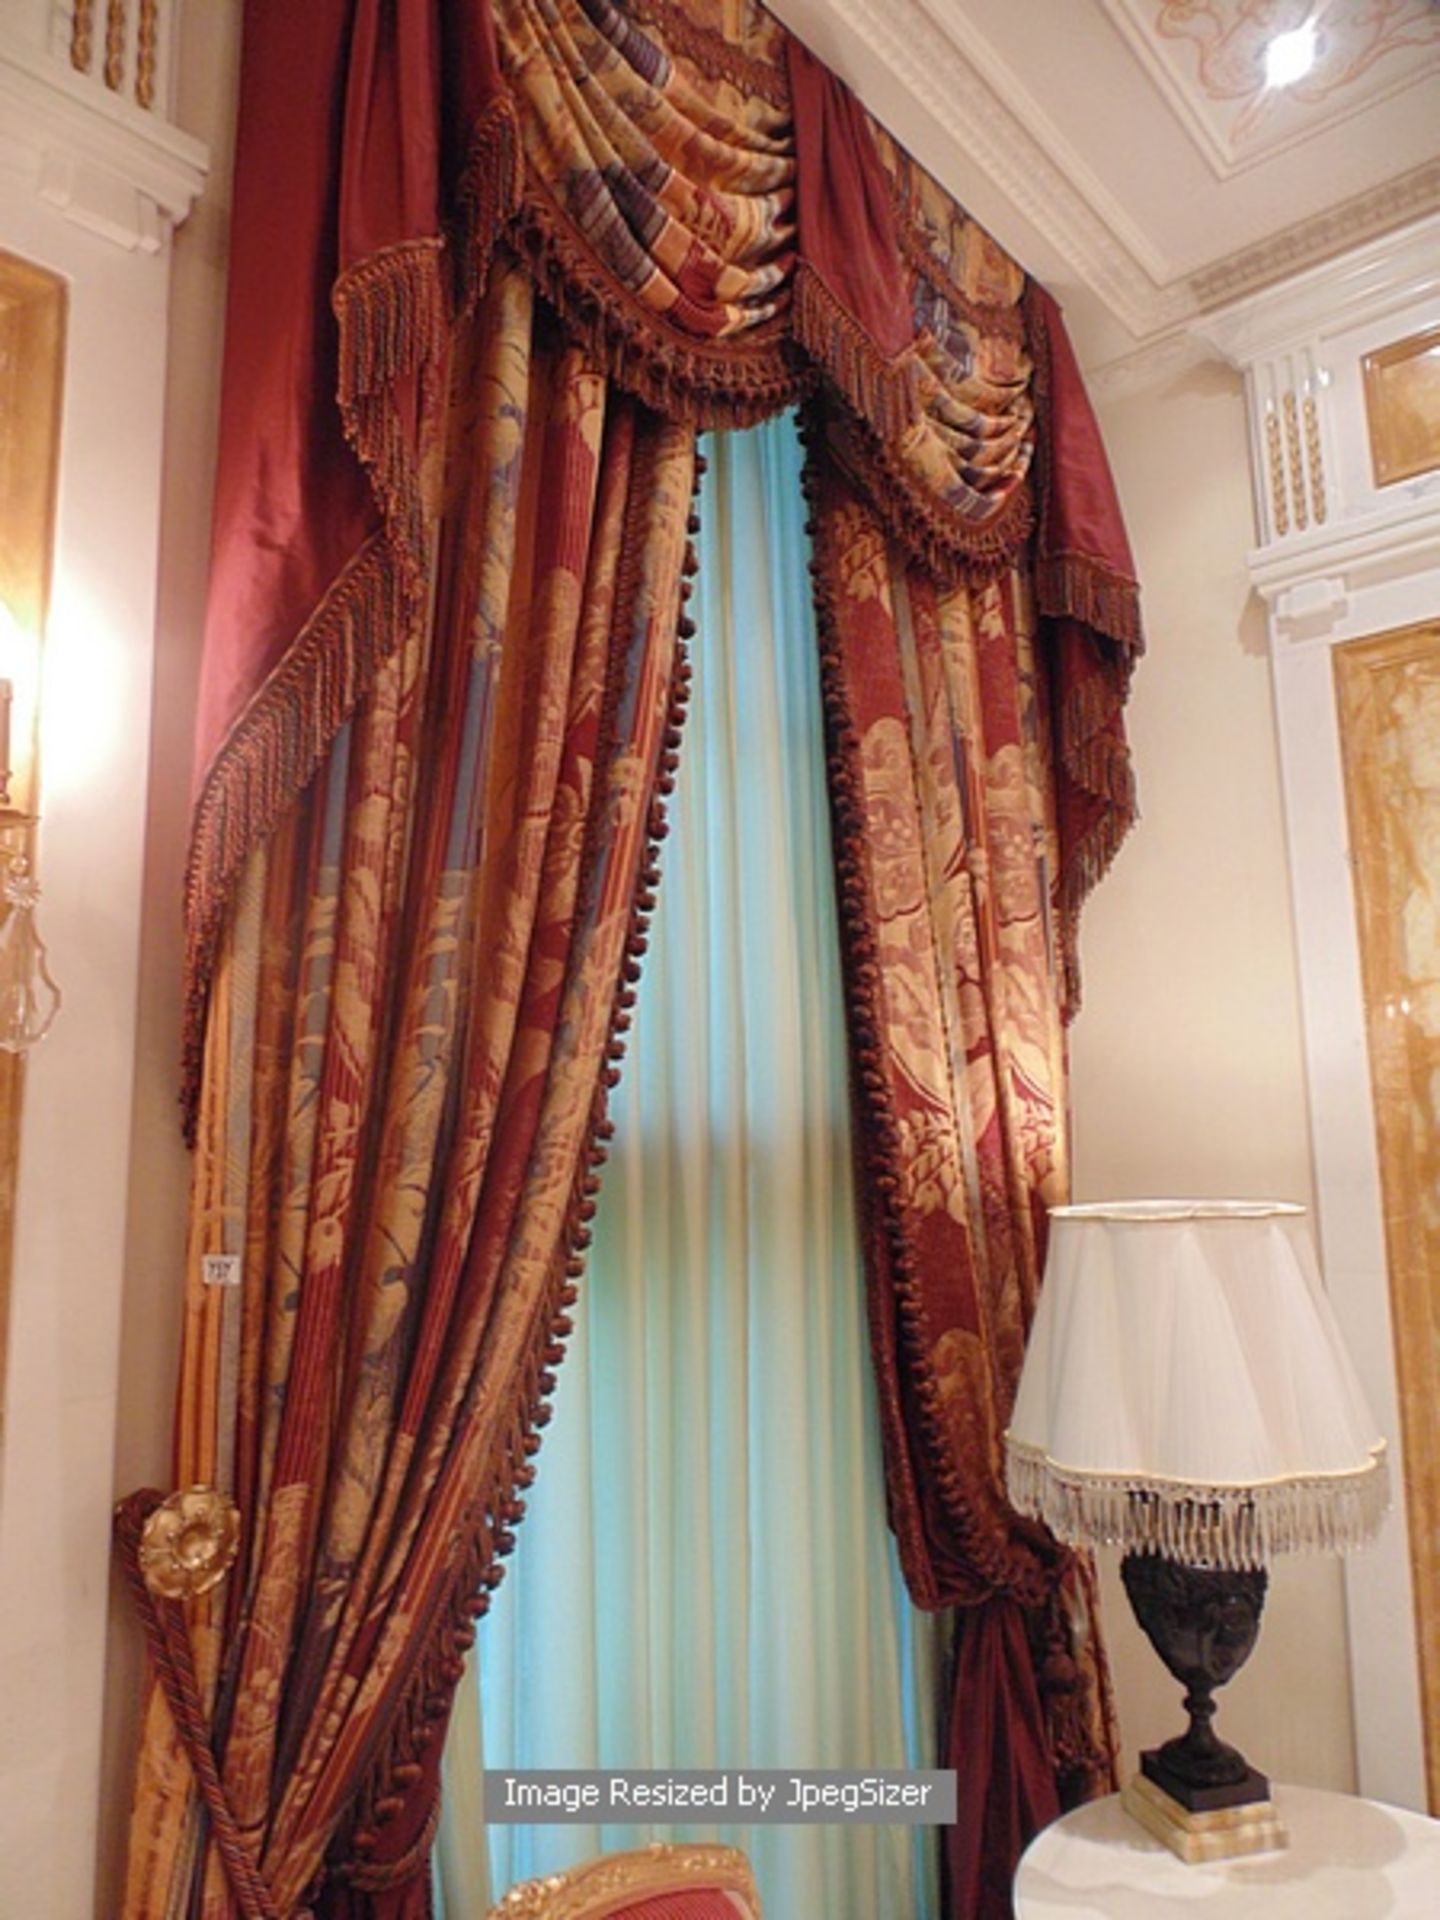 A pair of gold and burgundy curtains supplied by Jacquard from Rudolph Ackermann`s A series design - Image 5 of 7